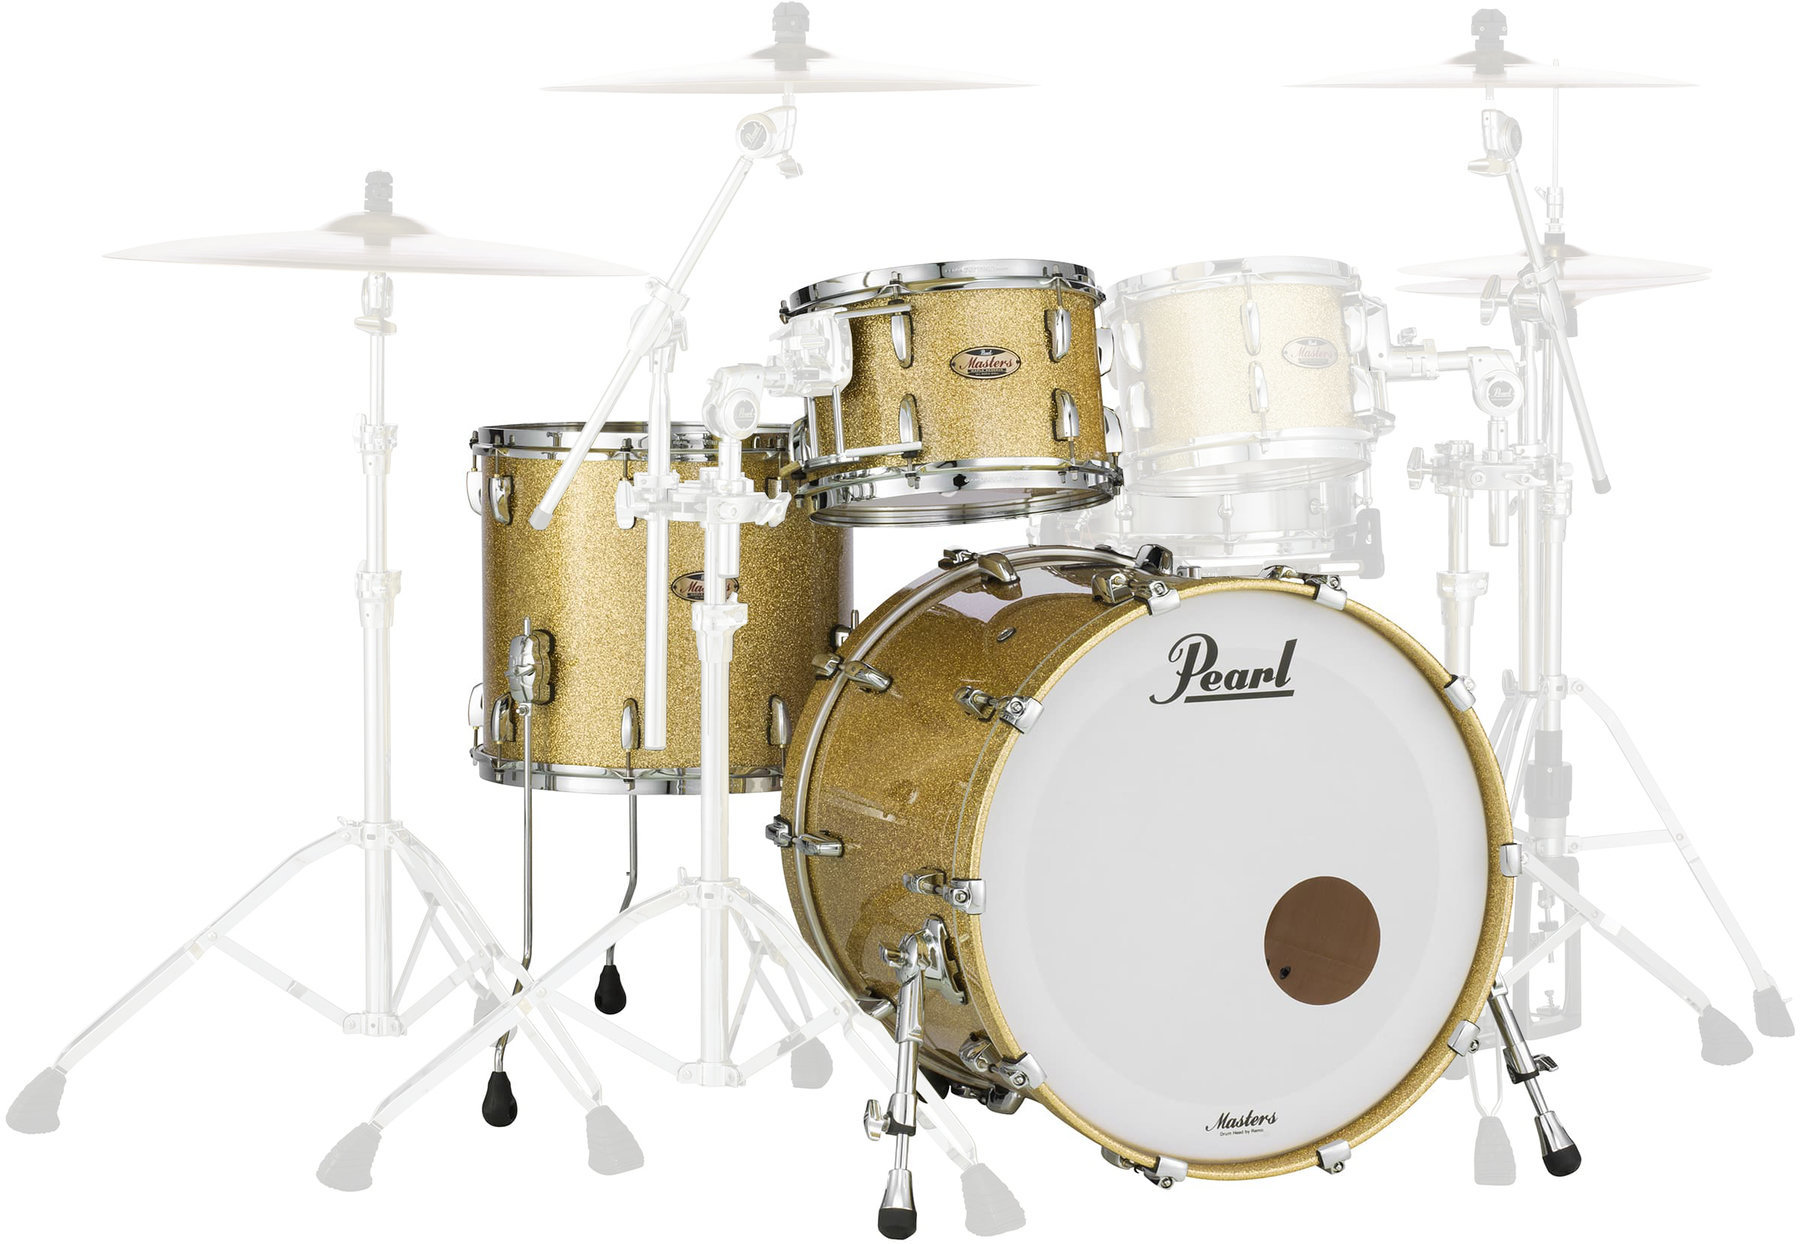 Batterie acoustique Pearl MRV943XEP-C347 Masters Maple Reserve Bombay Gold Sparkle